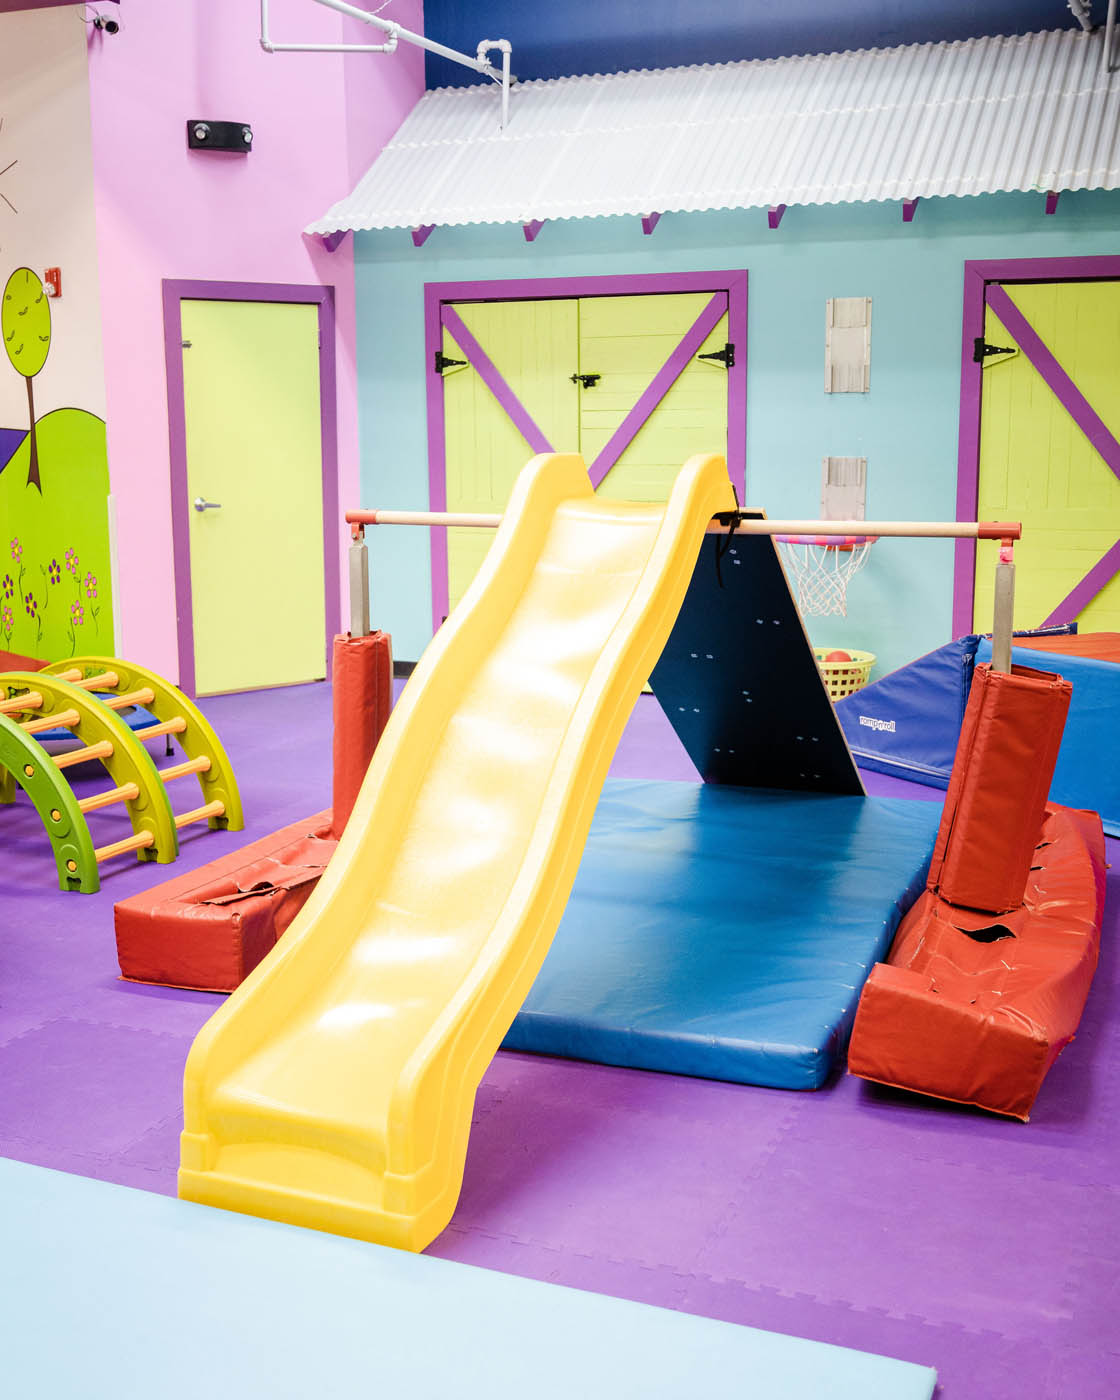 A Romp n' Roll Northwest Charlotte slide, indoor playgrounds in Charlotte, NC.